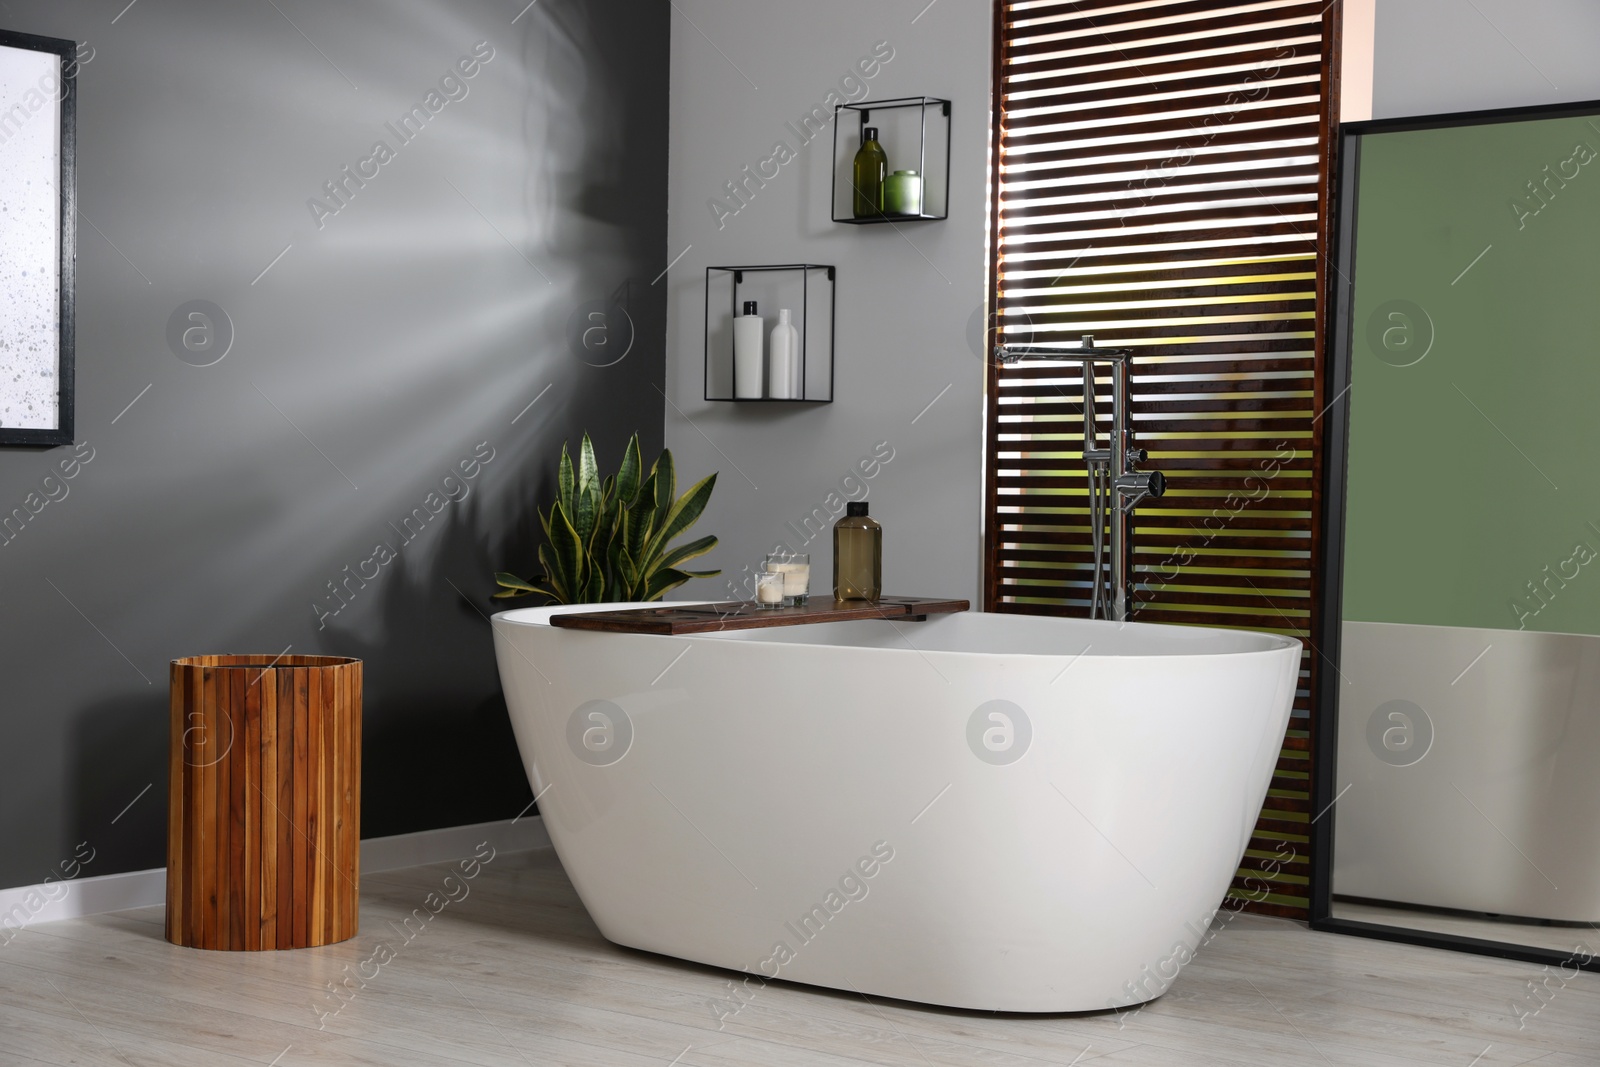 Photo of Stylish bathroom interior with ceramic tub, candles and care products on wooden bath tray